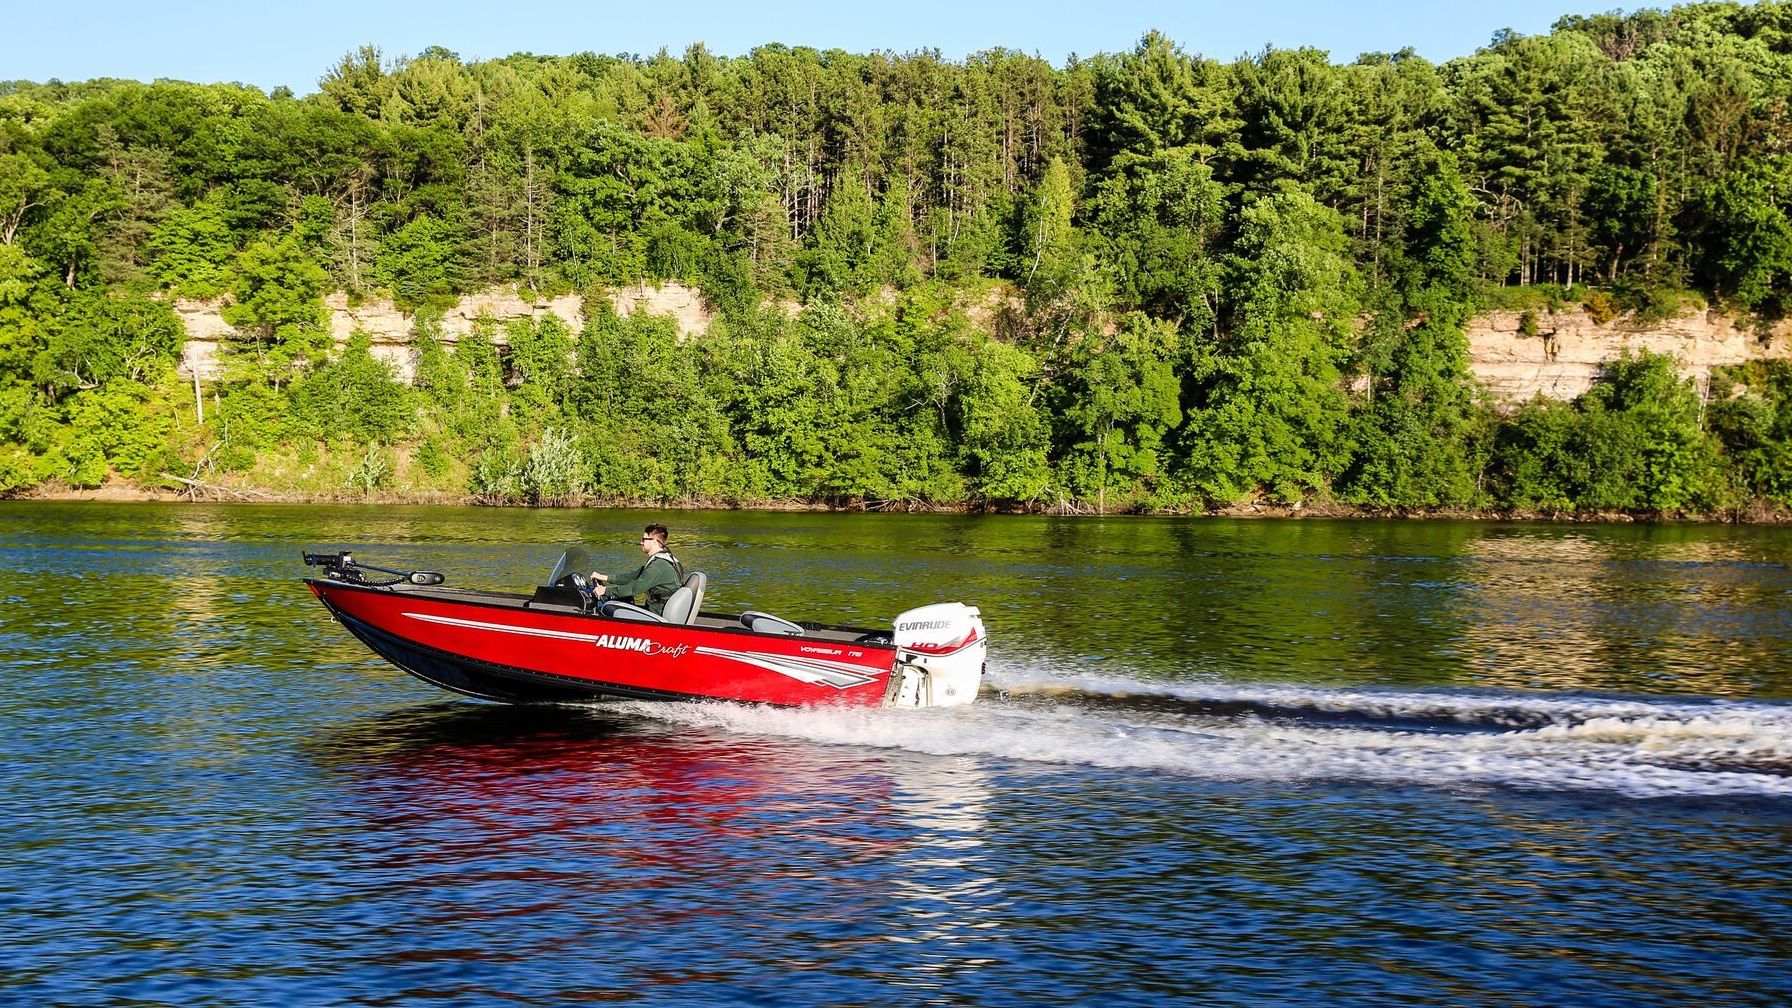 Man driving his Alumacraft boat with an Evinrude motor in a lake